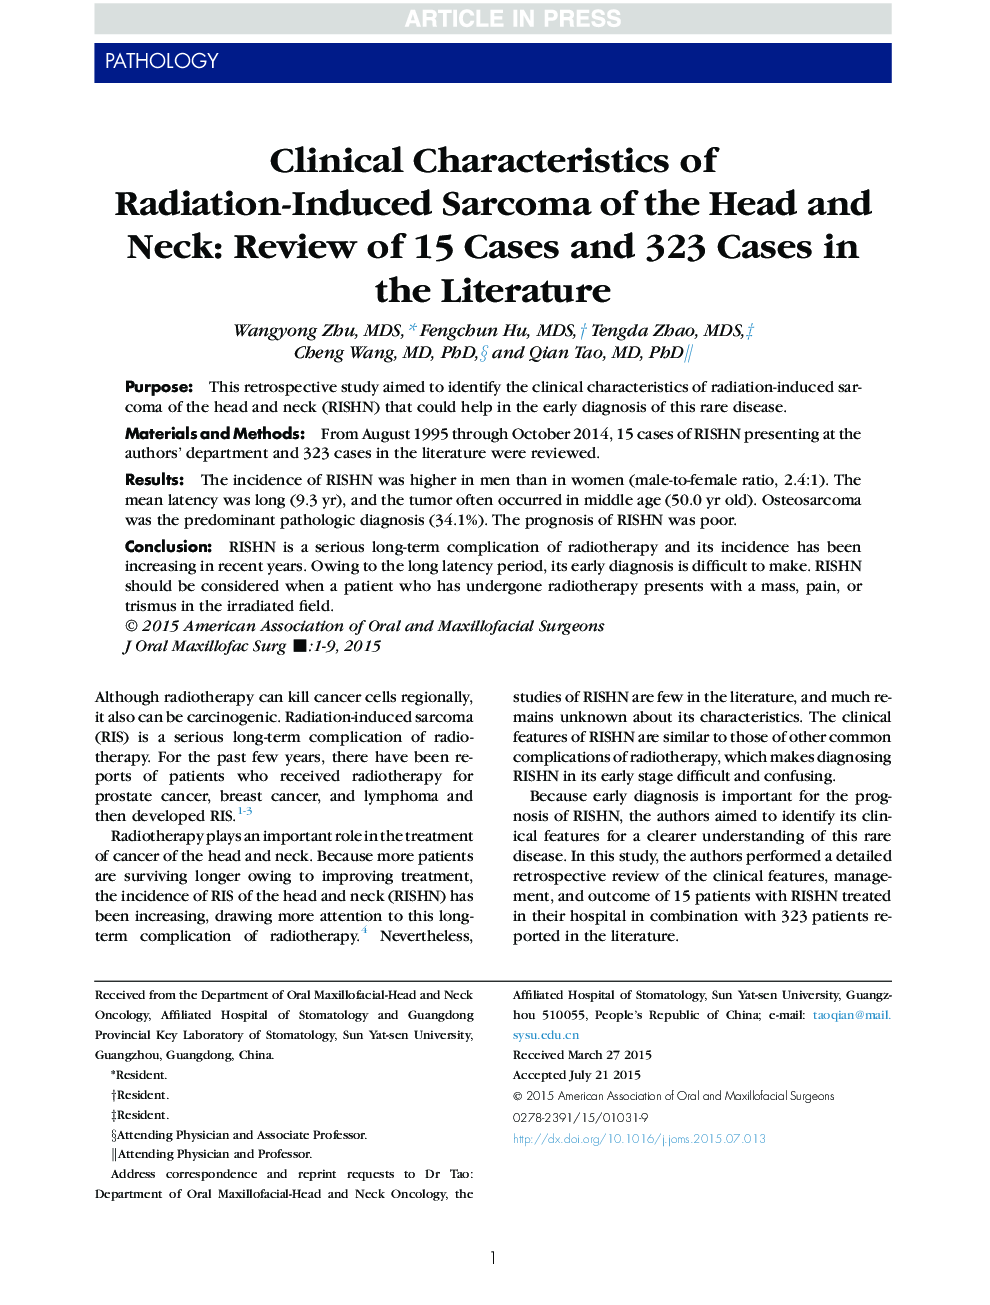 Clinical Characteristics of Radiation-Induced Sarcoma of the Head and Neck: Review of 15 Cases and 323 Cases in the Literature